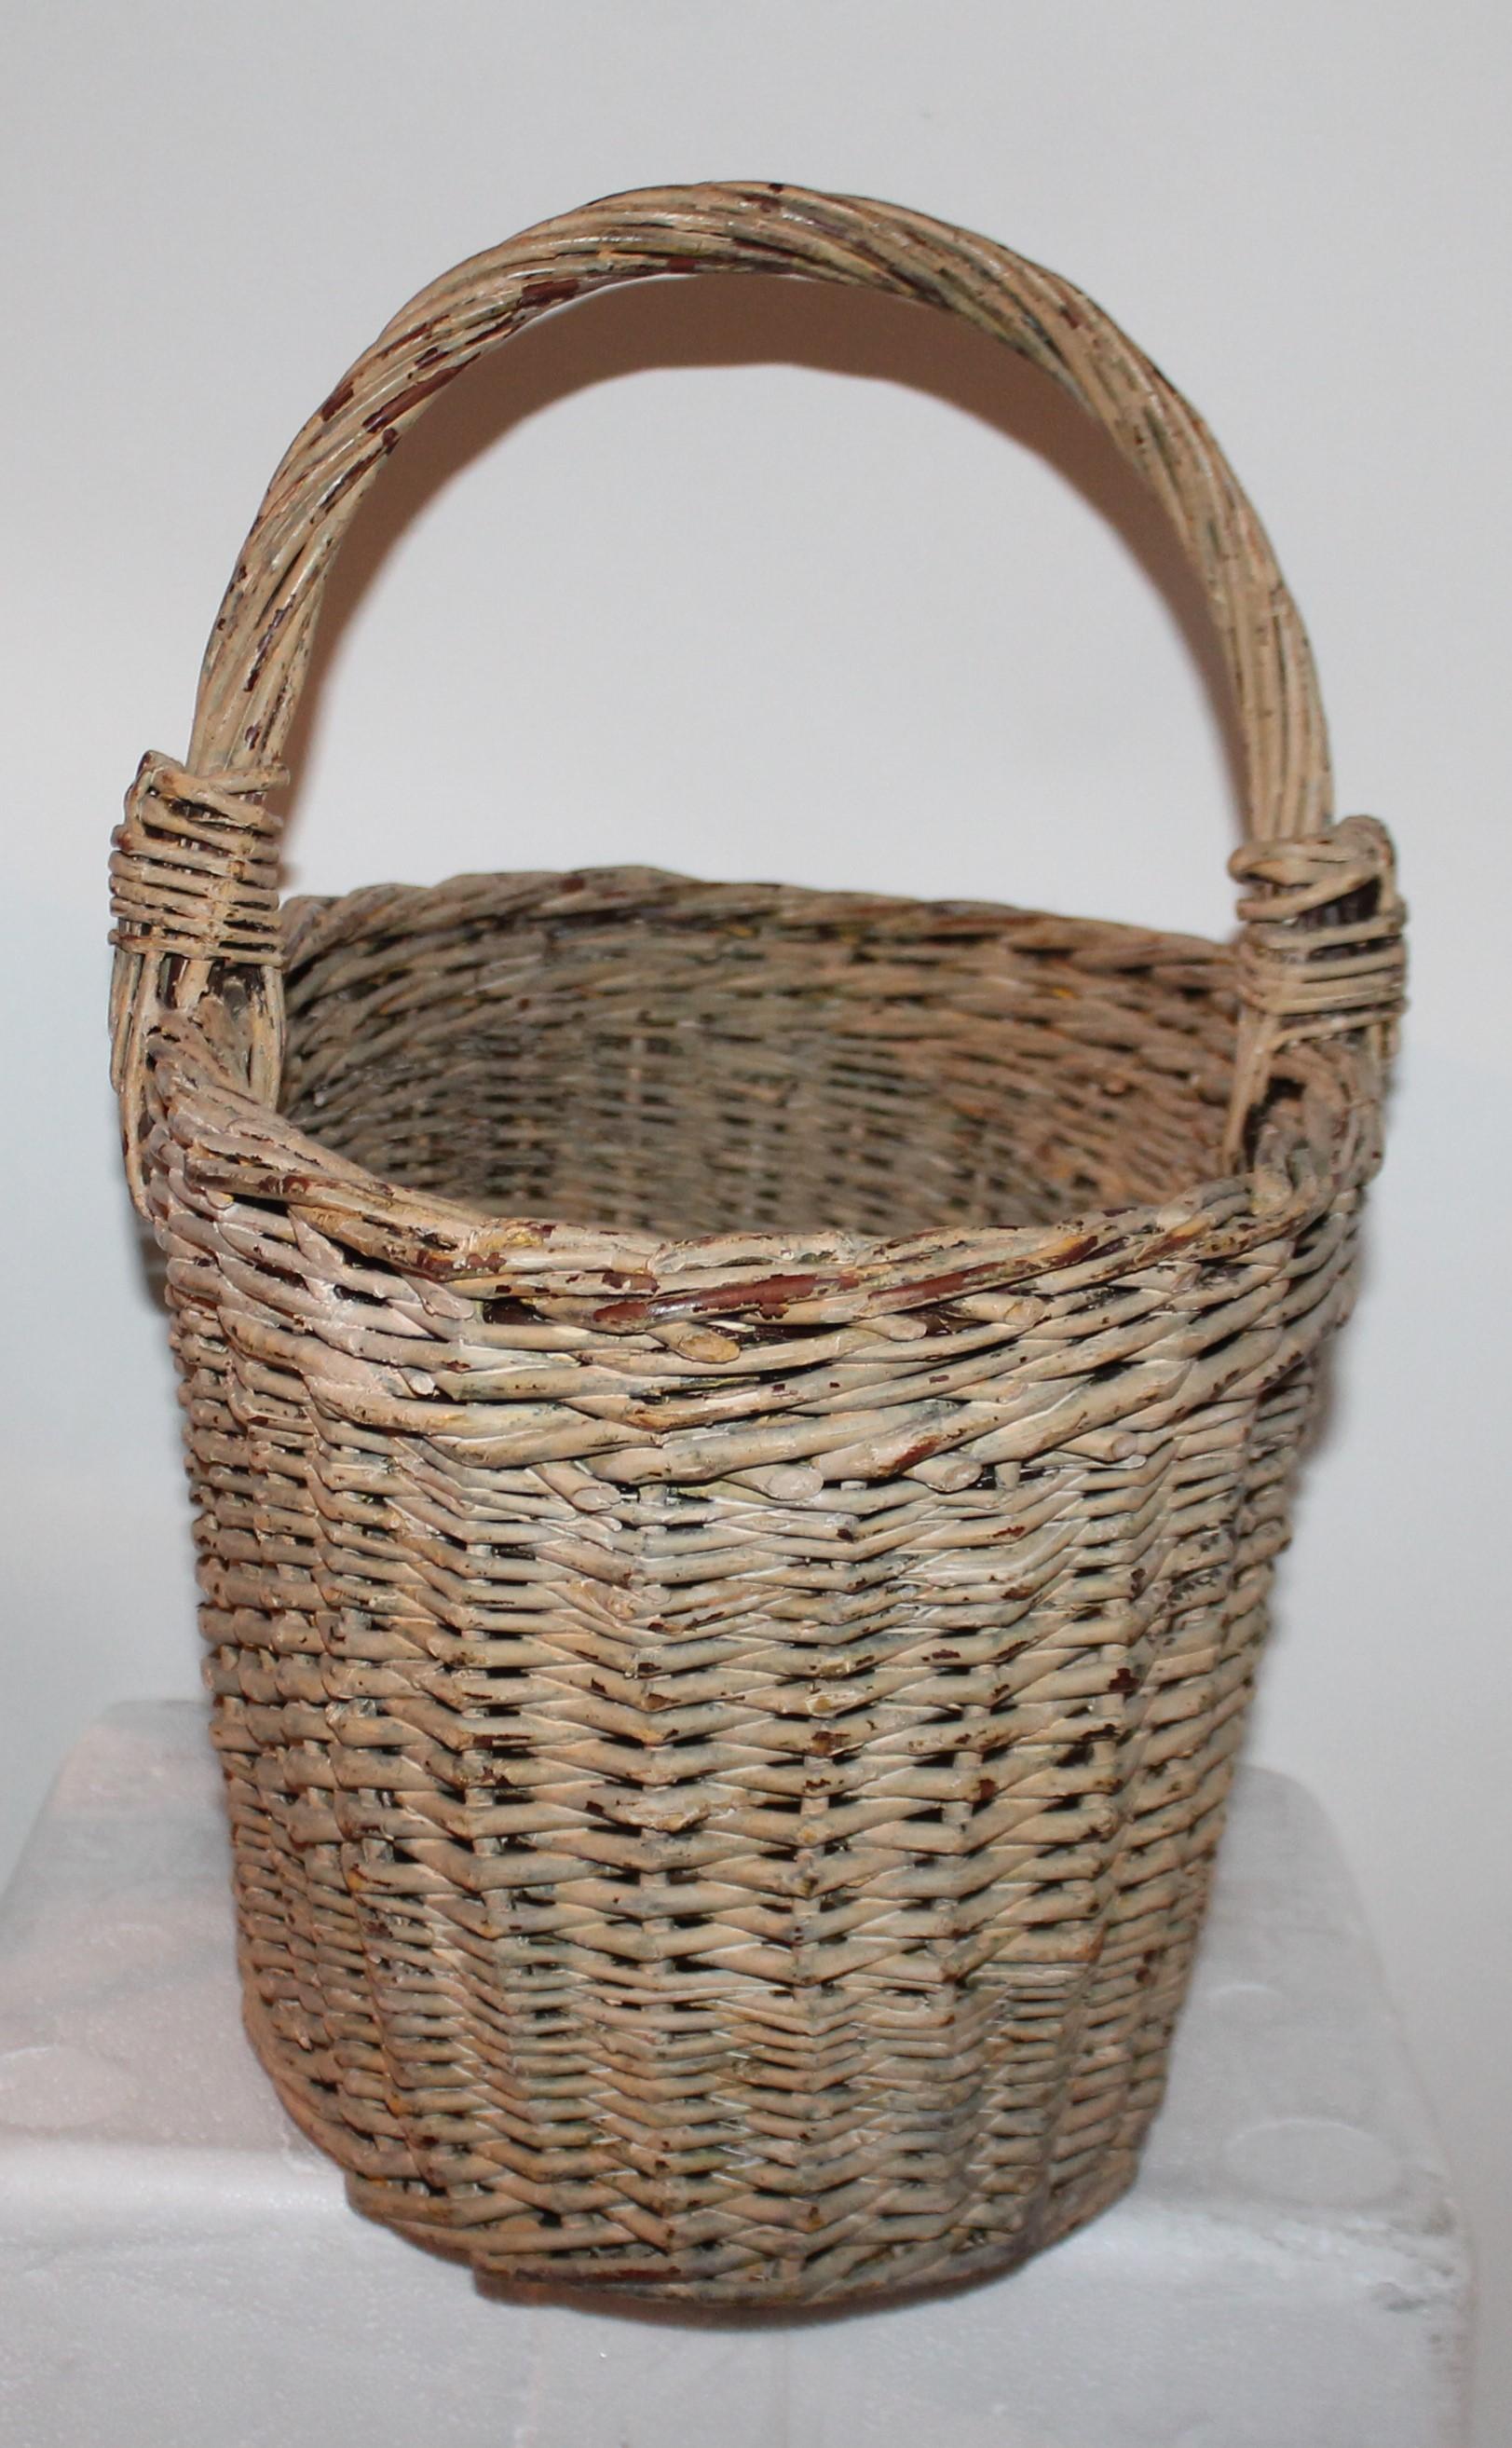 This is a pale yellow handled painted basket is from Pennsylvania. It is in very good condition.